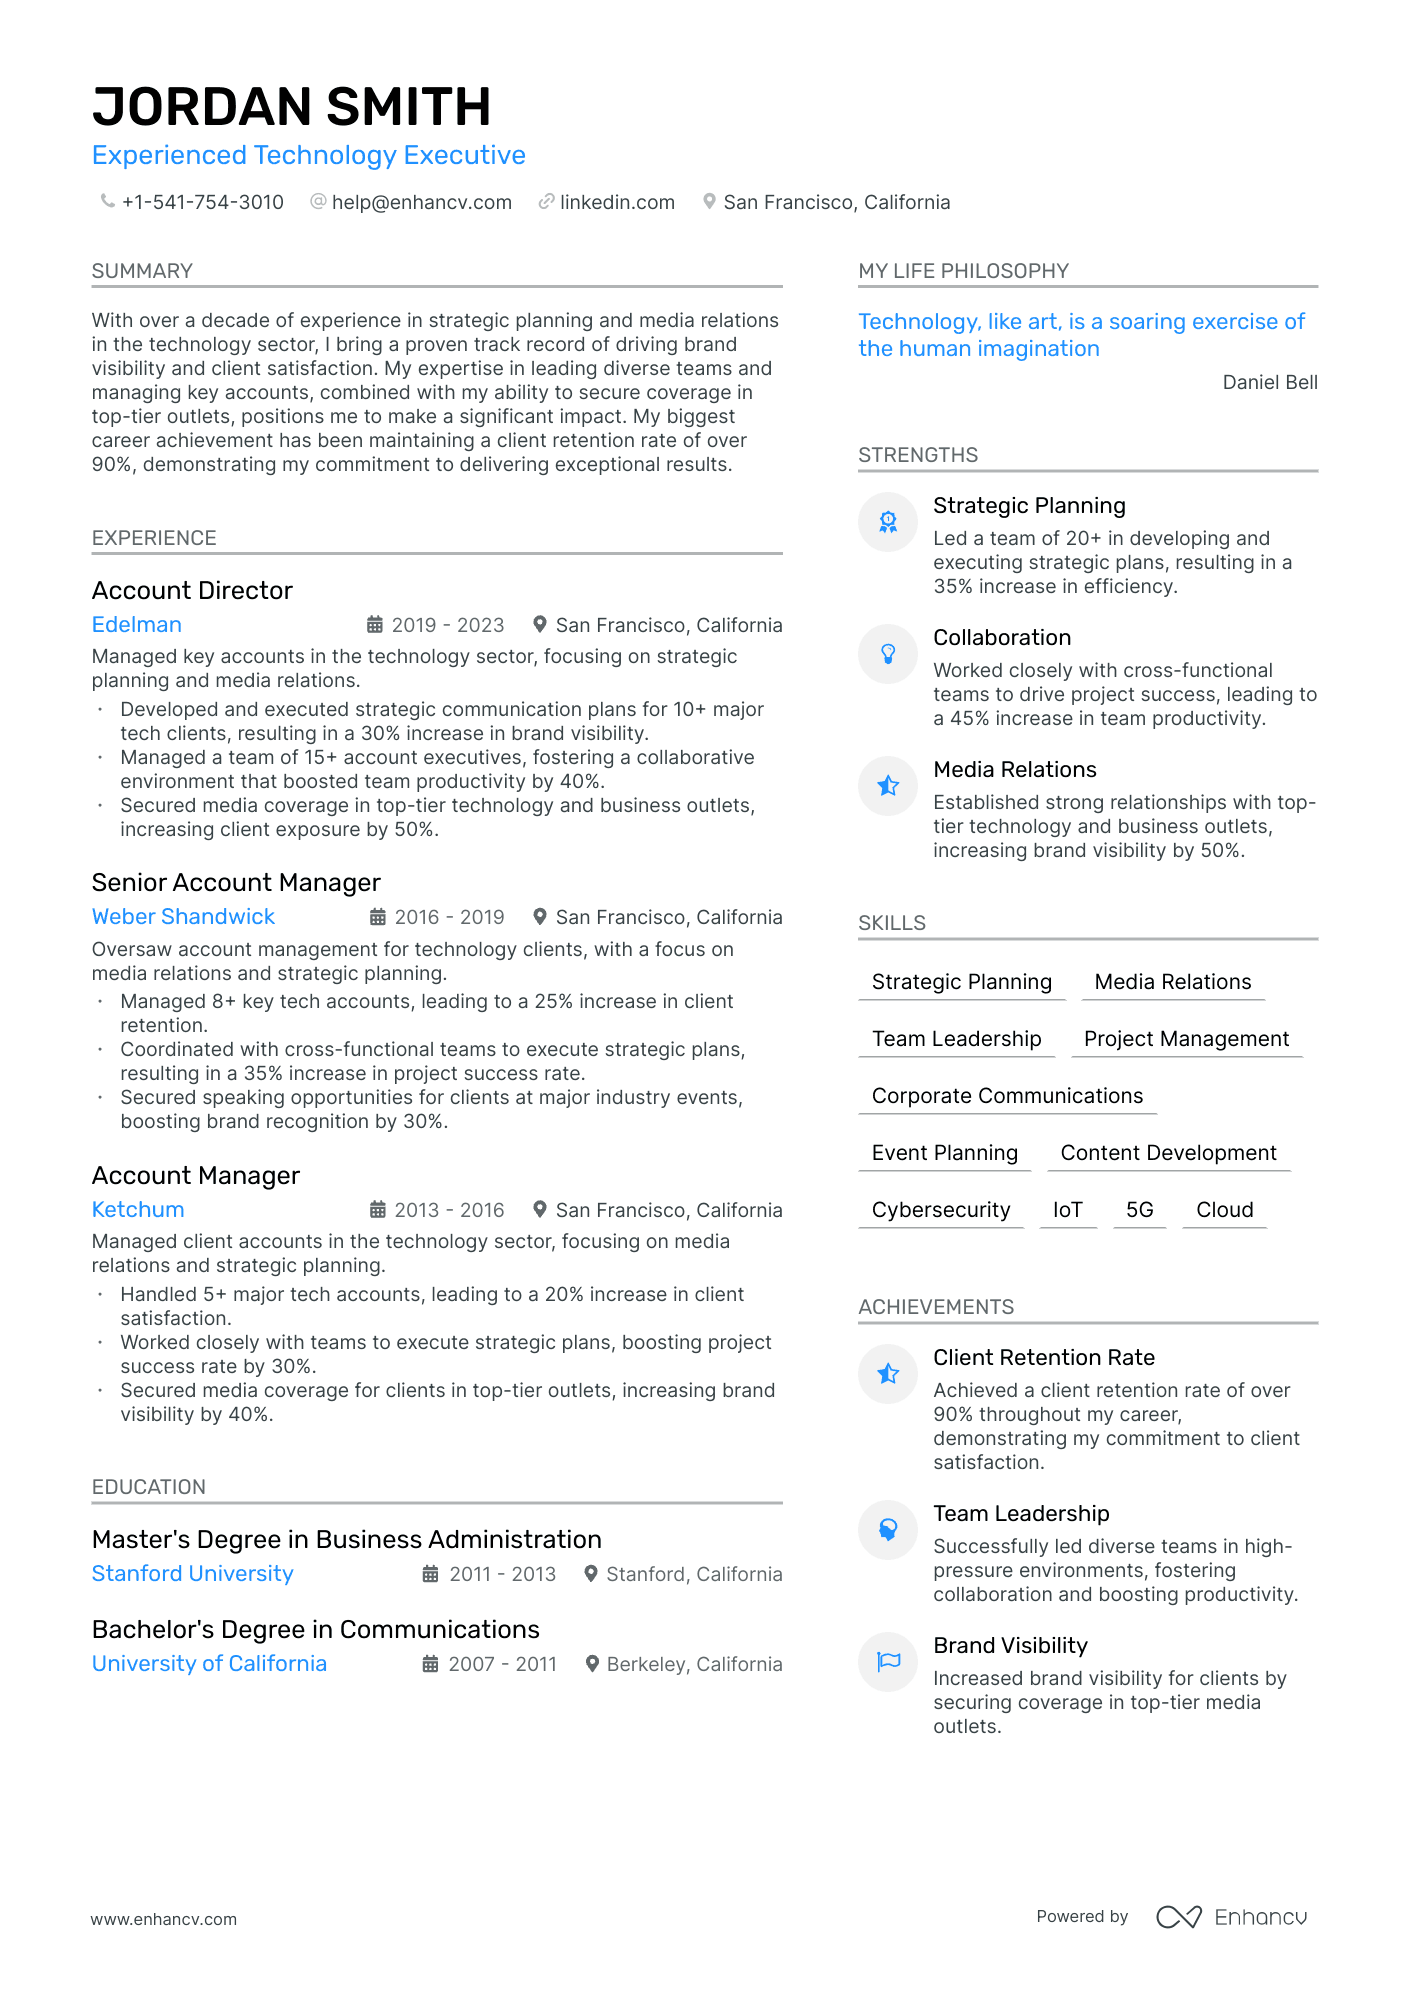 Experienced Technology Executive resume example